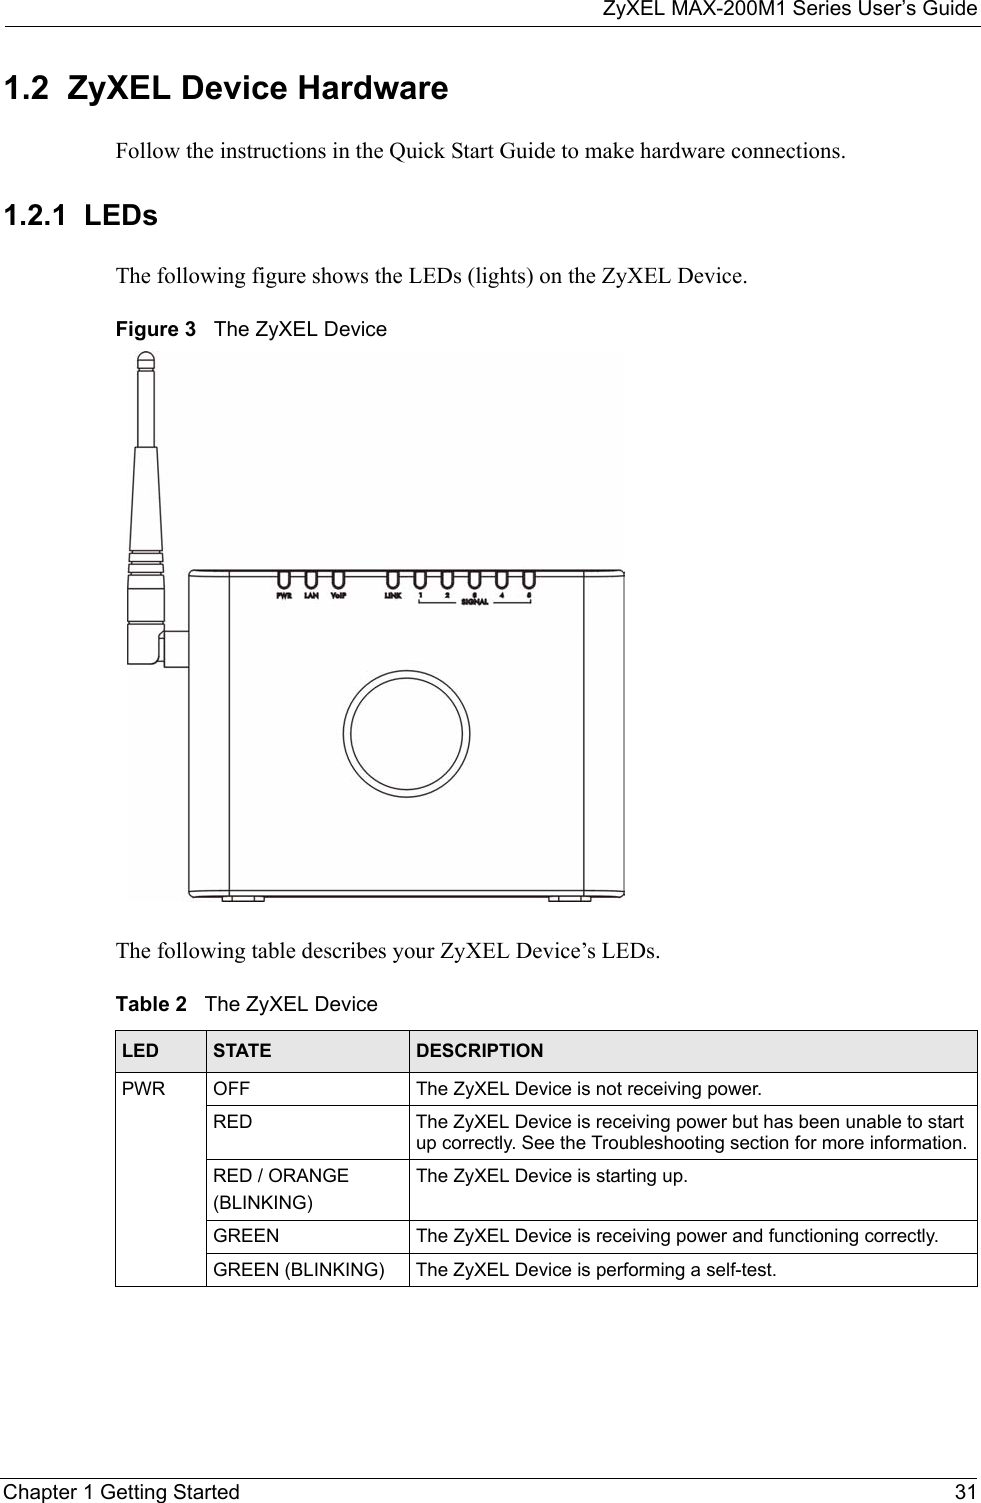 ZyXEL MAX-200M1 Series User’s GuideChapter 1 Getting Started 311.2  ZyXEL Device HardwareFollow the instructions in the Quick Start Guide to make hardware connections.1.2.1  LEDsThe following figure shows the LEDs (lights) on the ZyXEL Device.Figure 3   The ZyXEL DeviceThe following table describes your ZyXEL Device’s LEDs.Table 2   The ZyXEL DeviceLED STATE DESCRIPTIONPWR OFF The ZyXEL Device is not receiving power.RED The ZyXEL Device is receiving power but has been unable to start up correctly. See the Troubleshooting section for more information.RED / ORANGE(BLINKING)The ZyXEL Device is starting up.GREEN The ZyXEL Device is receiving power and functioning correctly.GREEN (BLINKING) The ZyXEL Device is performing a self-test.